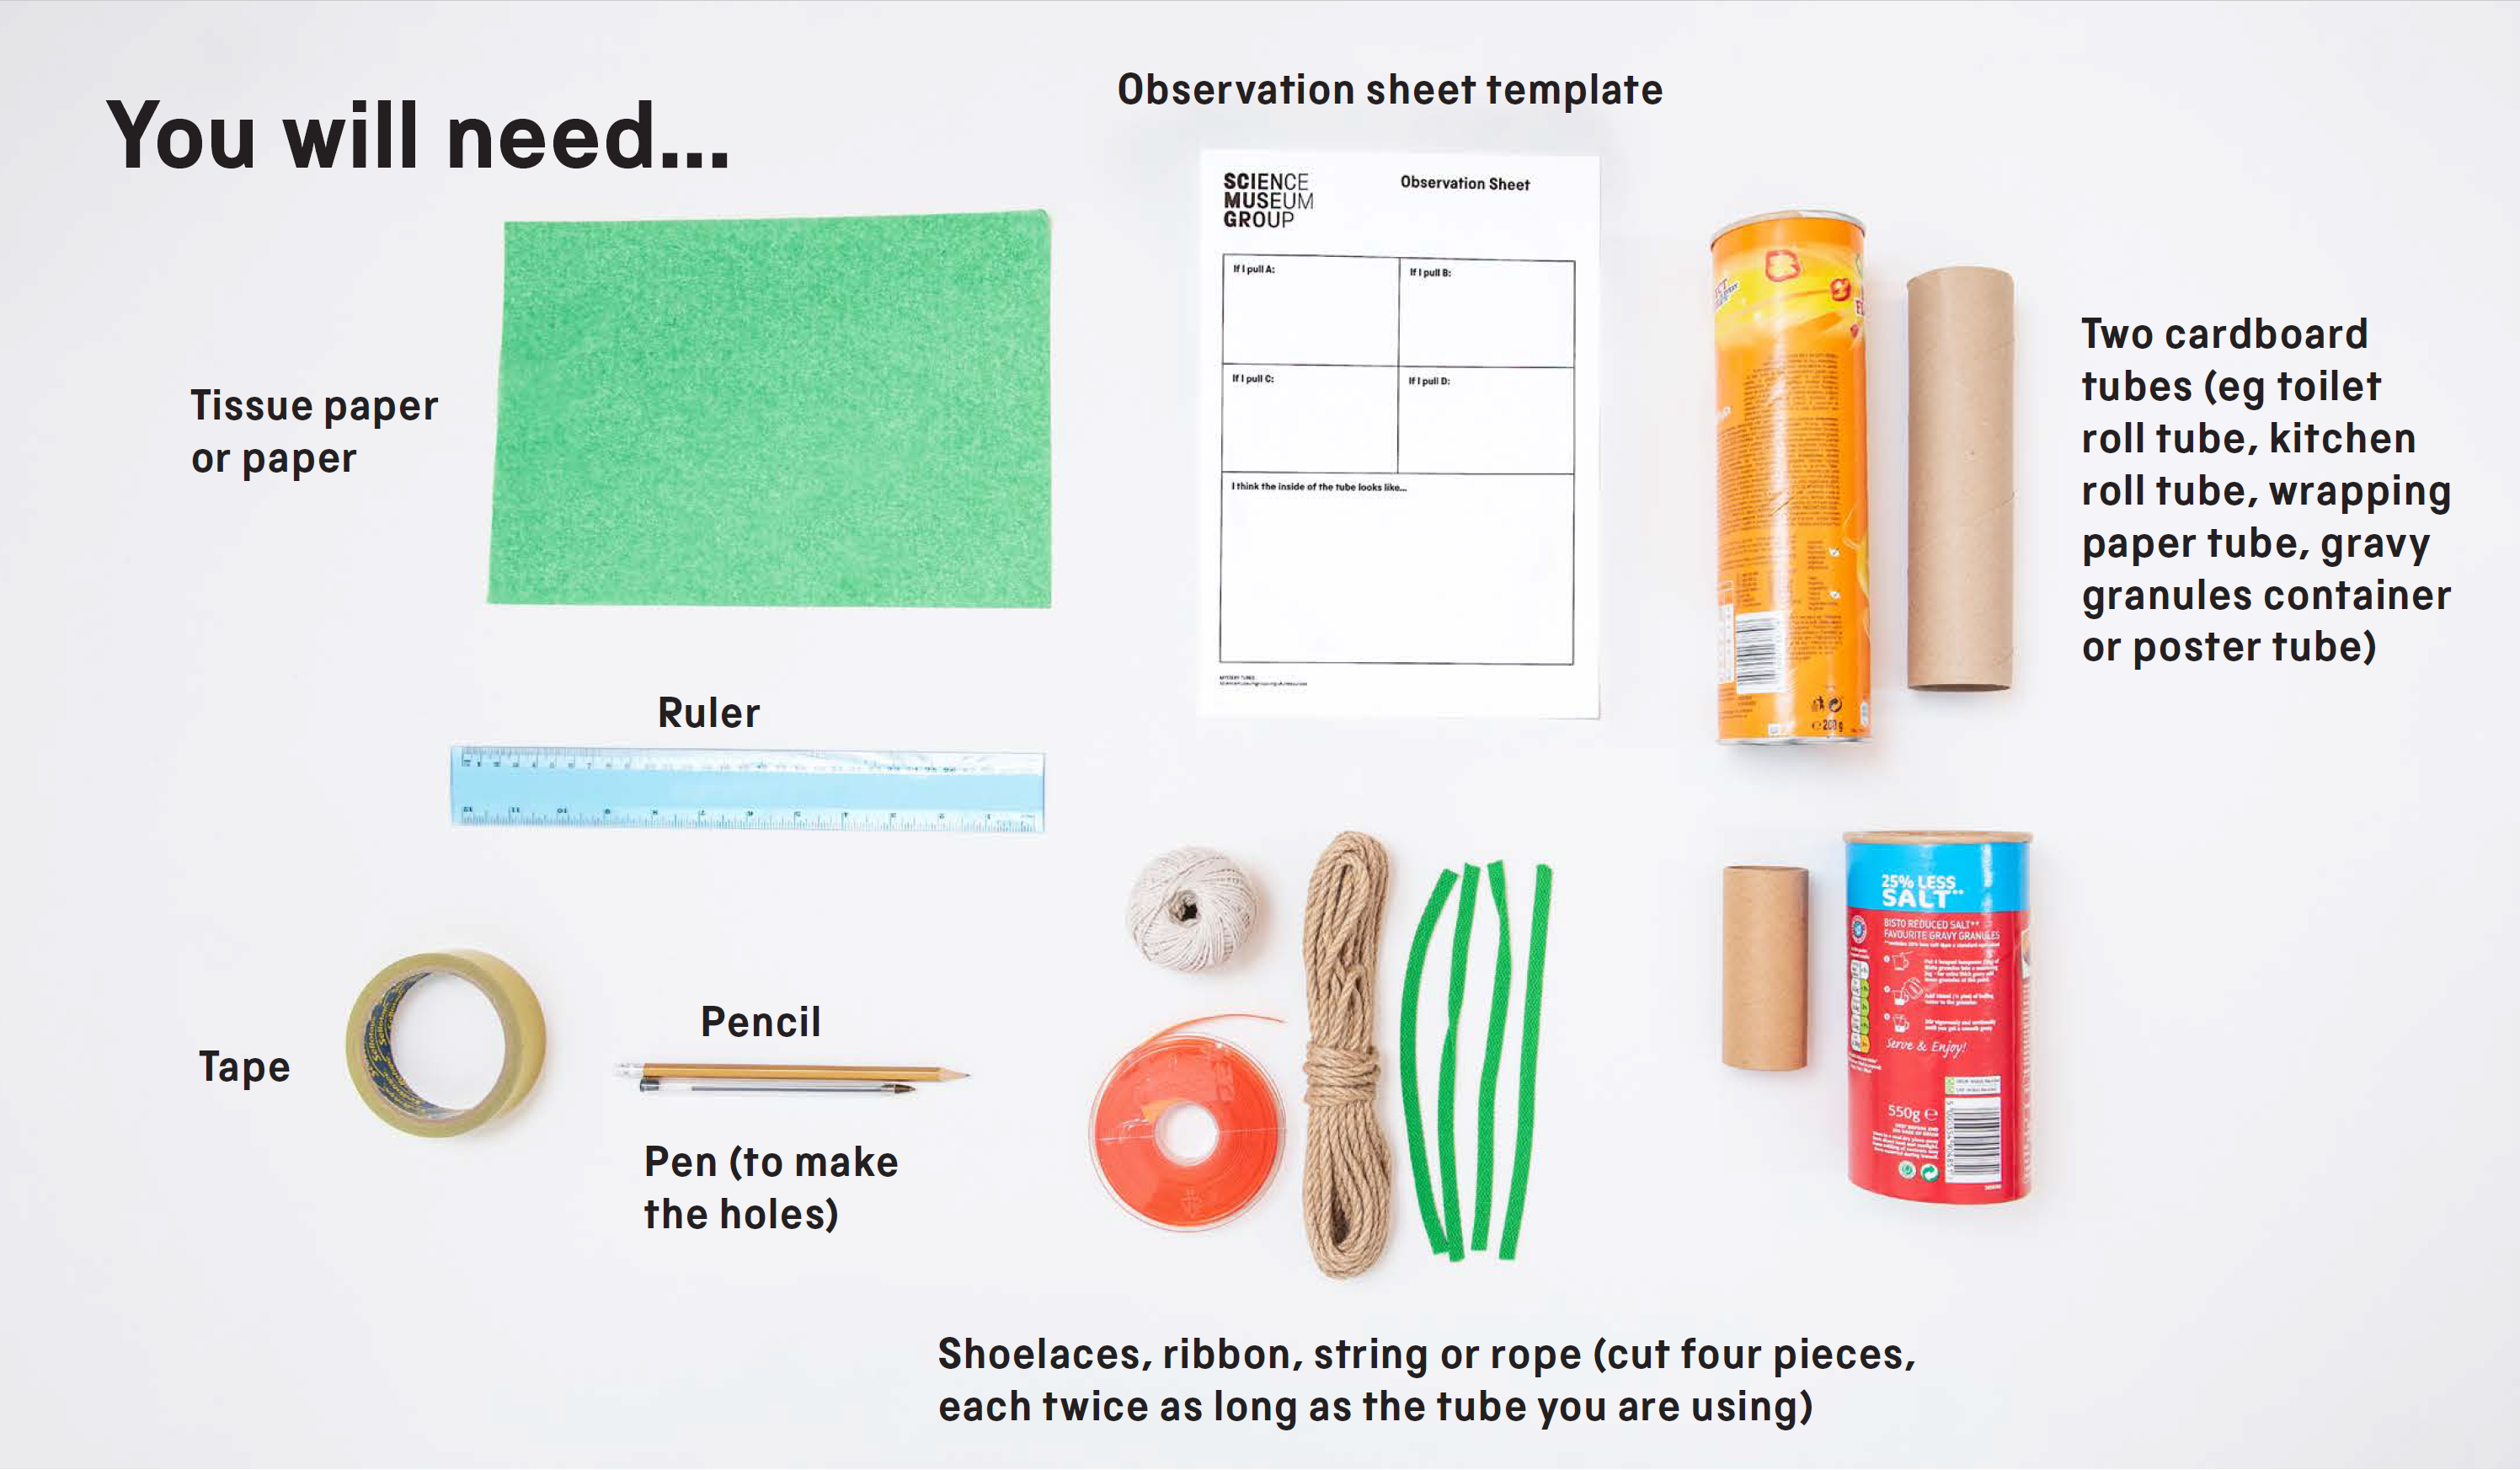 You will need: tissue paper or paper, a ruler, sticky tape, a pencil or pen (to make the holes), an observation sheet template, two cardboard tubes (this could be a toilet roll tube, wrapping paper tube, gravy granules container or a poster tube) and shoelaces, ribbon, string or rope (cut four pieces, each twice as long as the tube you are using)